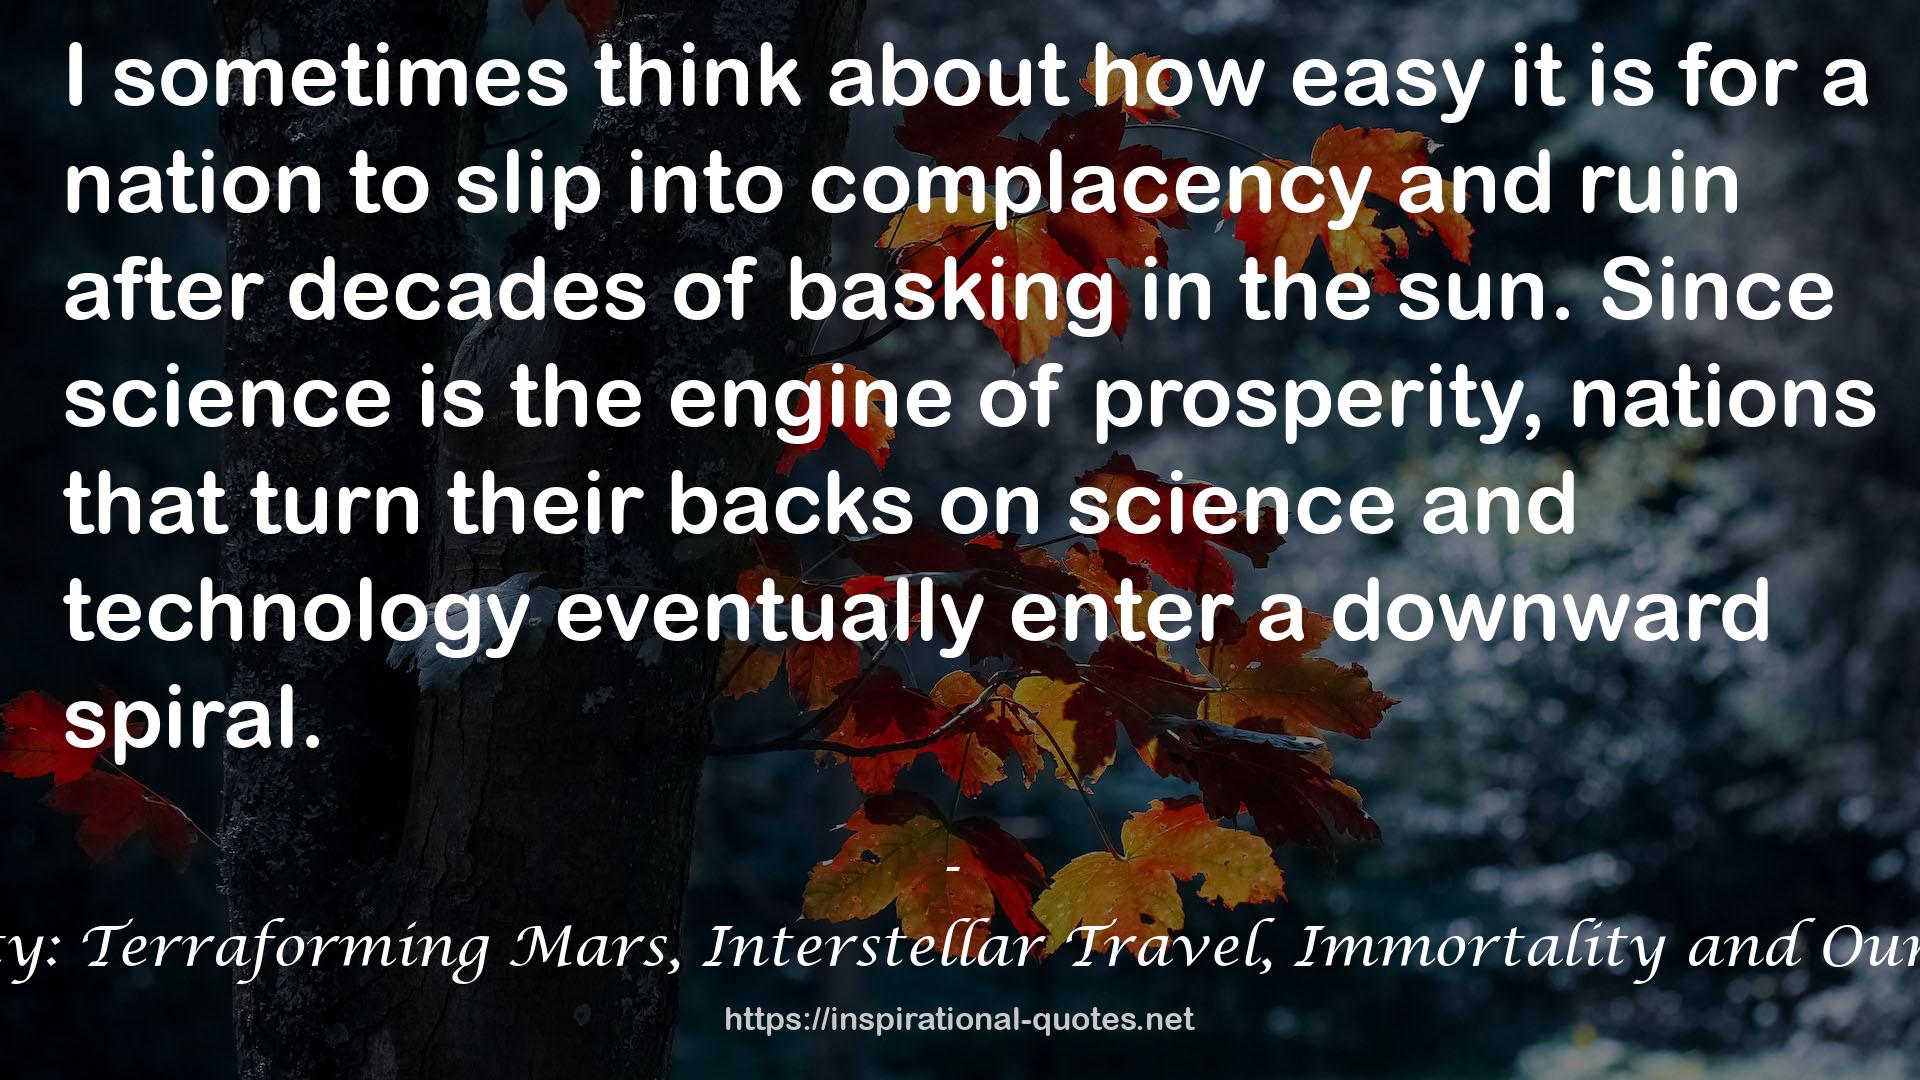 The Future of Humanity: Terraforming Mars, Interstellar Travel, Immortality and Our Destiny Beyond Earth QUOTES